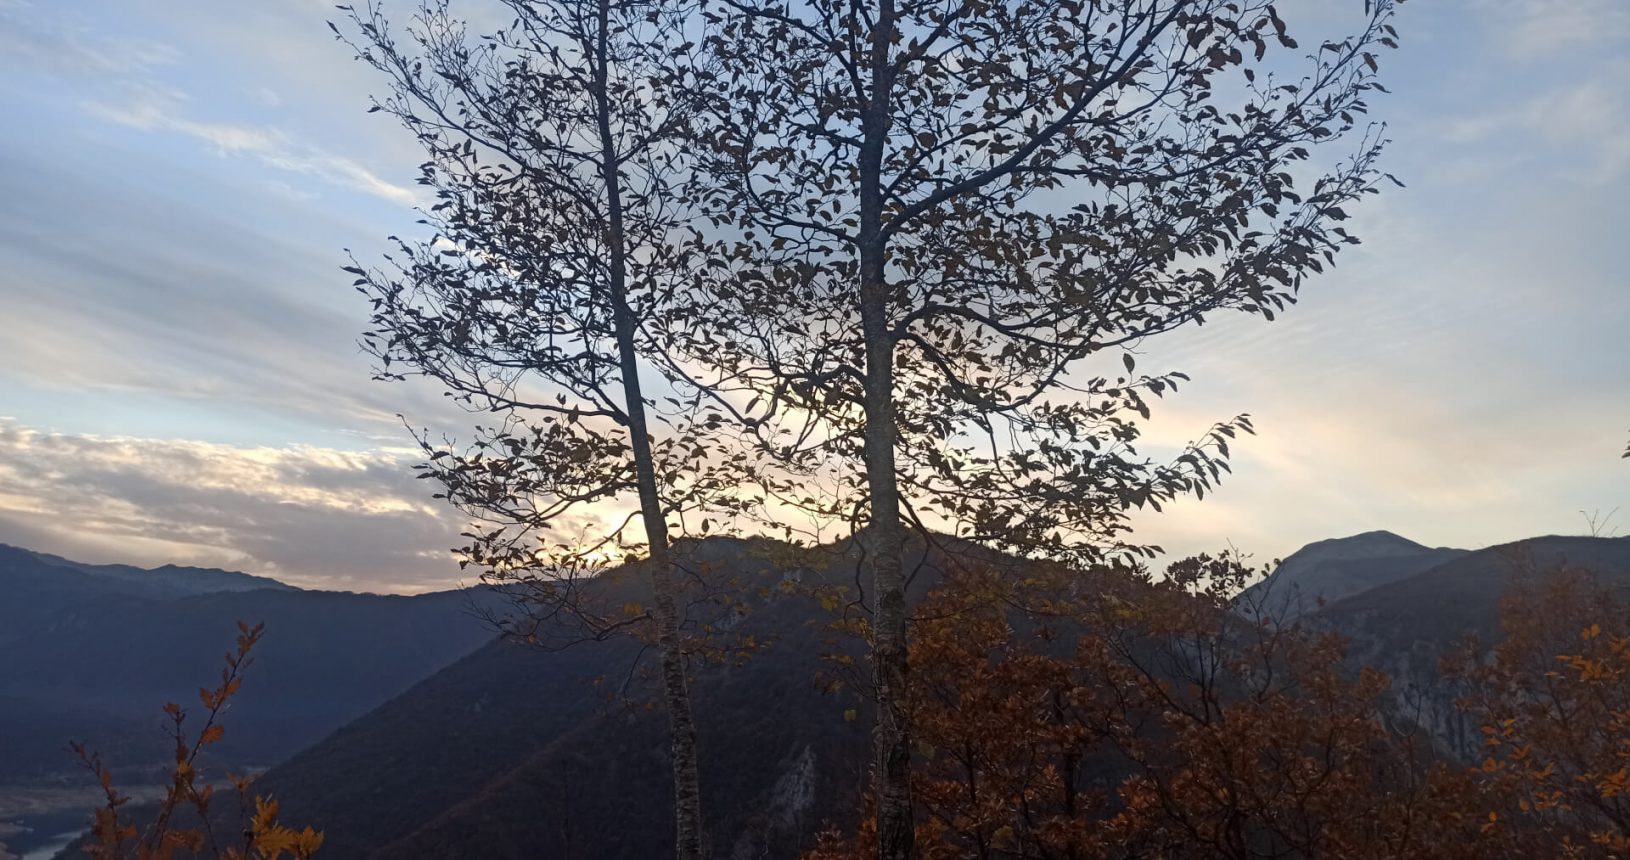 Mountains and trees at sunset Piva lake observation platform